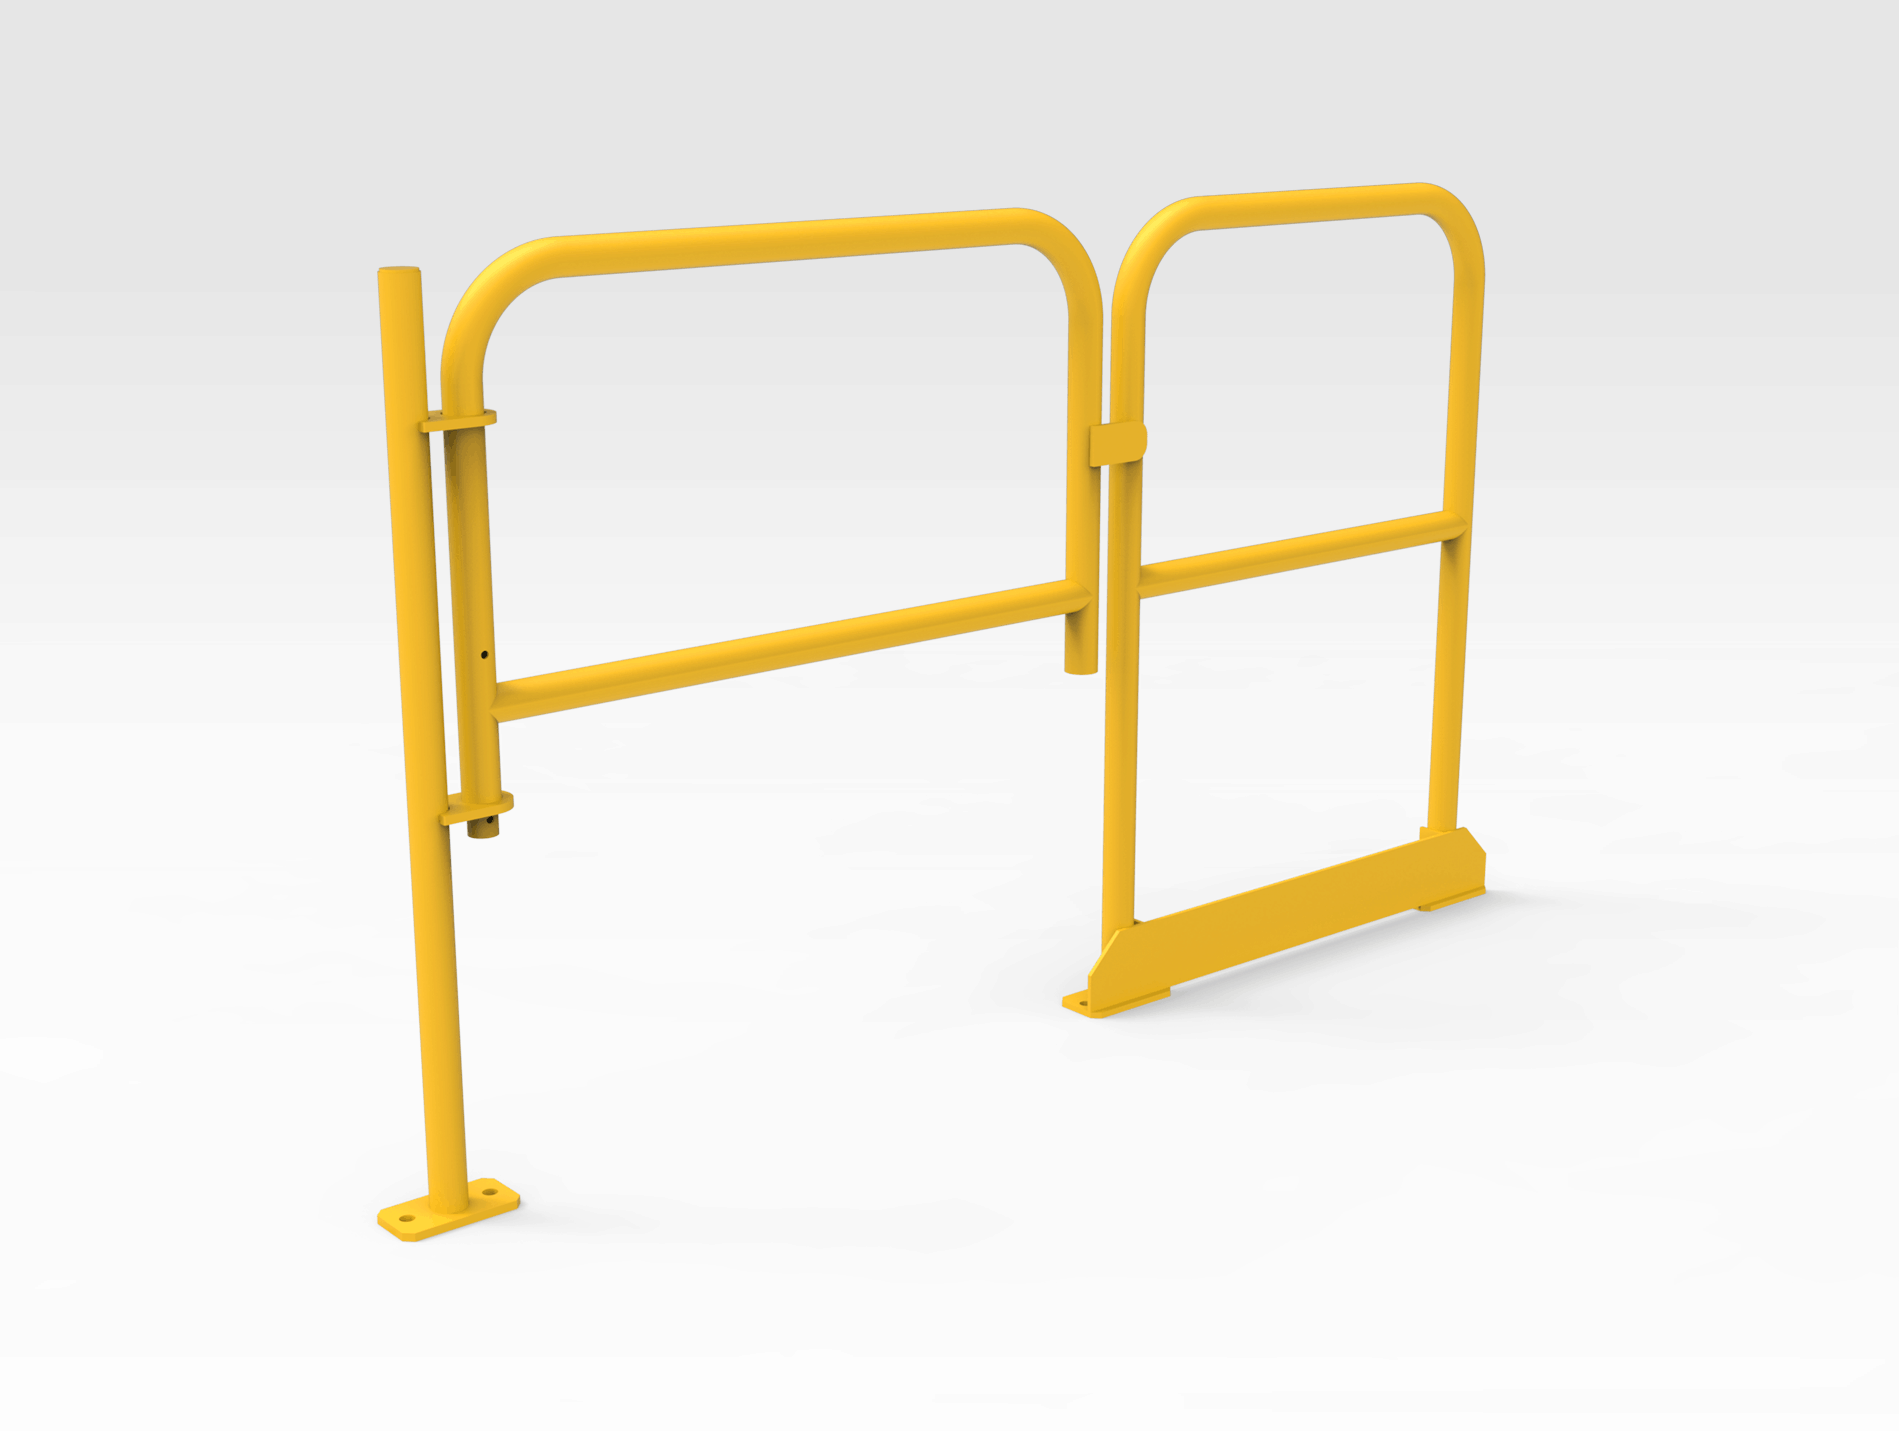 Self-closing Gate with Handrail - Bend-tech Group